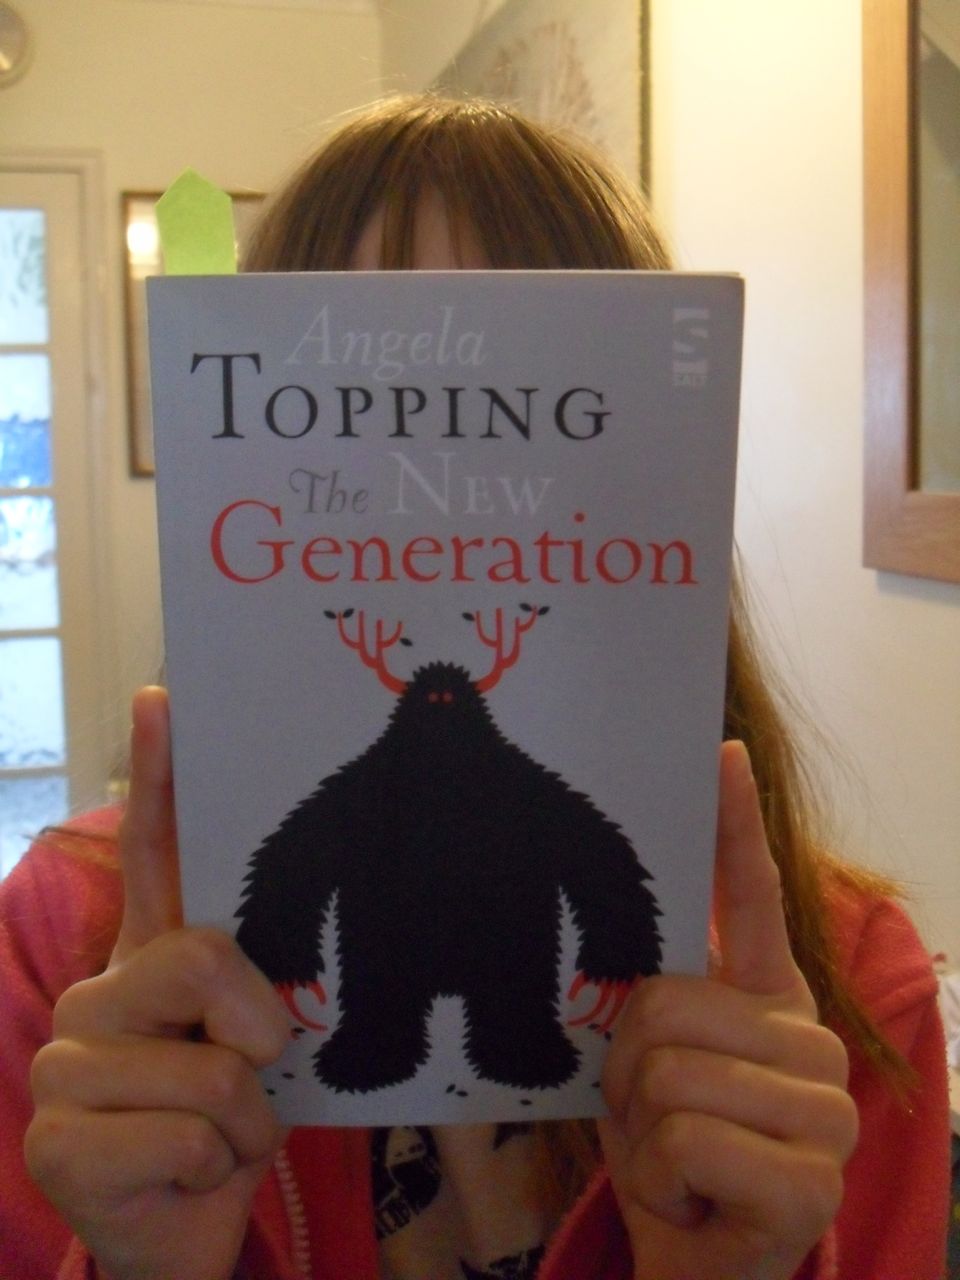 'The New Generation' by Angela Topping